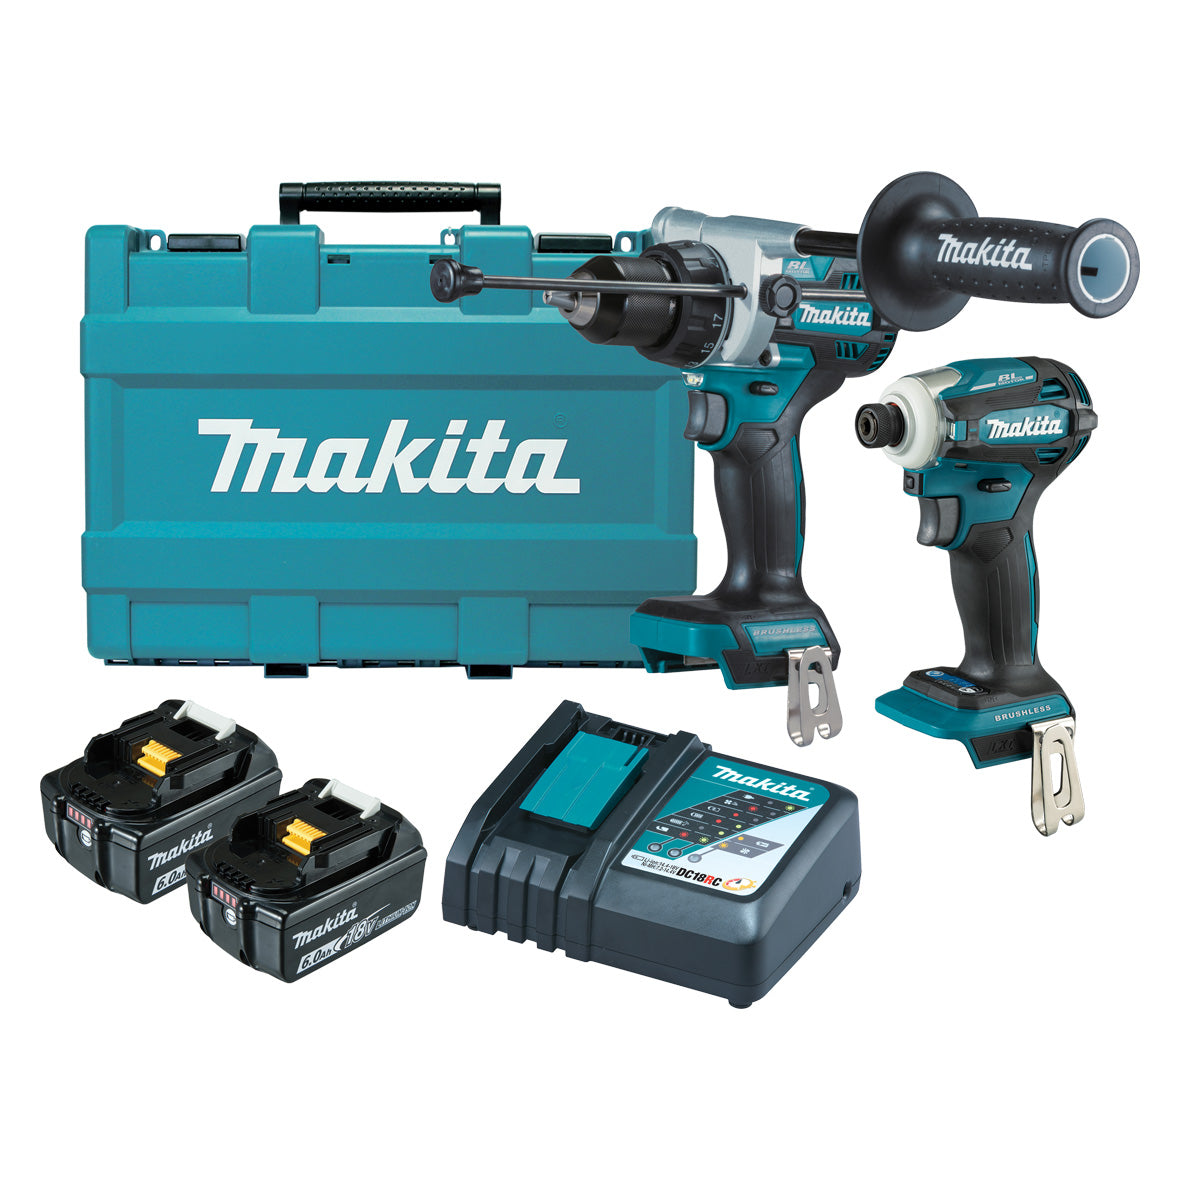 2Pce 18V 6.0Ah Brushless Hammer Driver Drill + Impact Driver DLX2455G by Makita